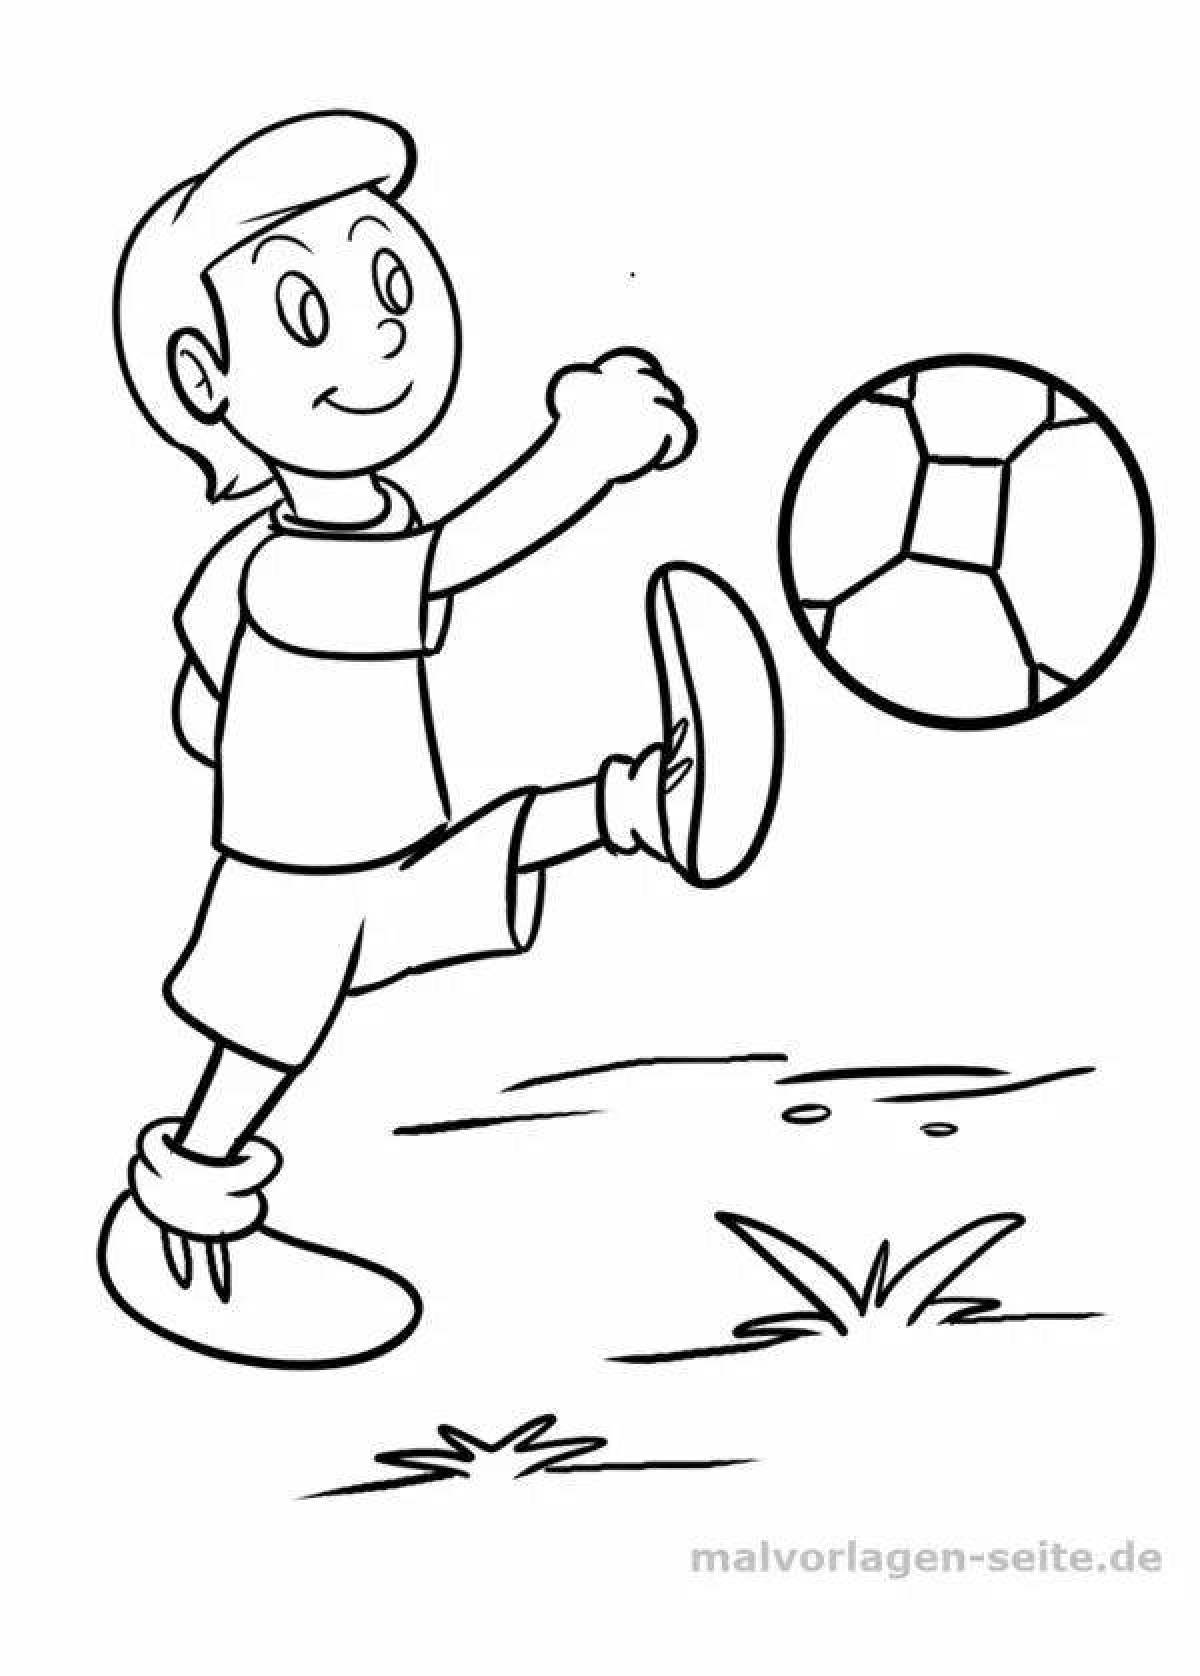 Entertaining coloring book sports and health for children